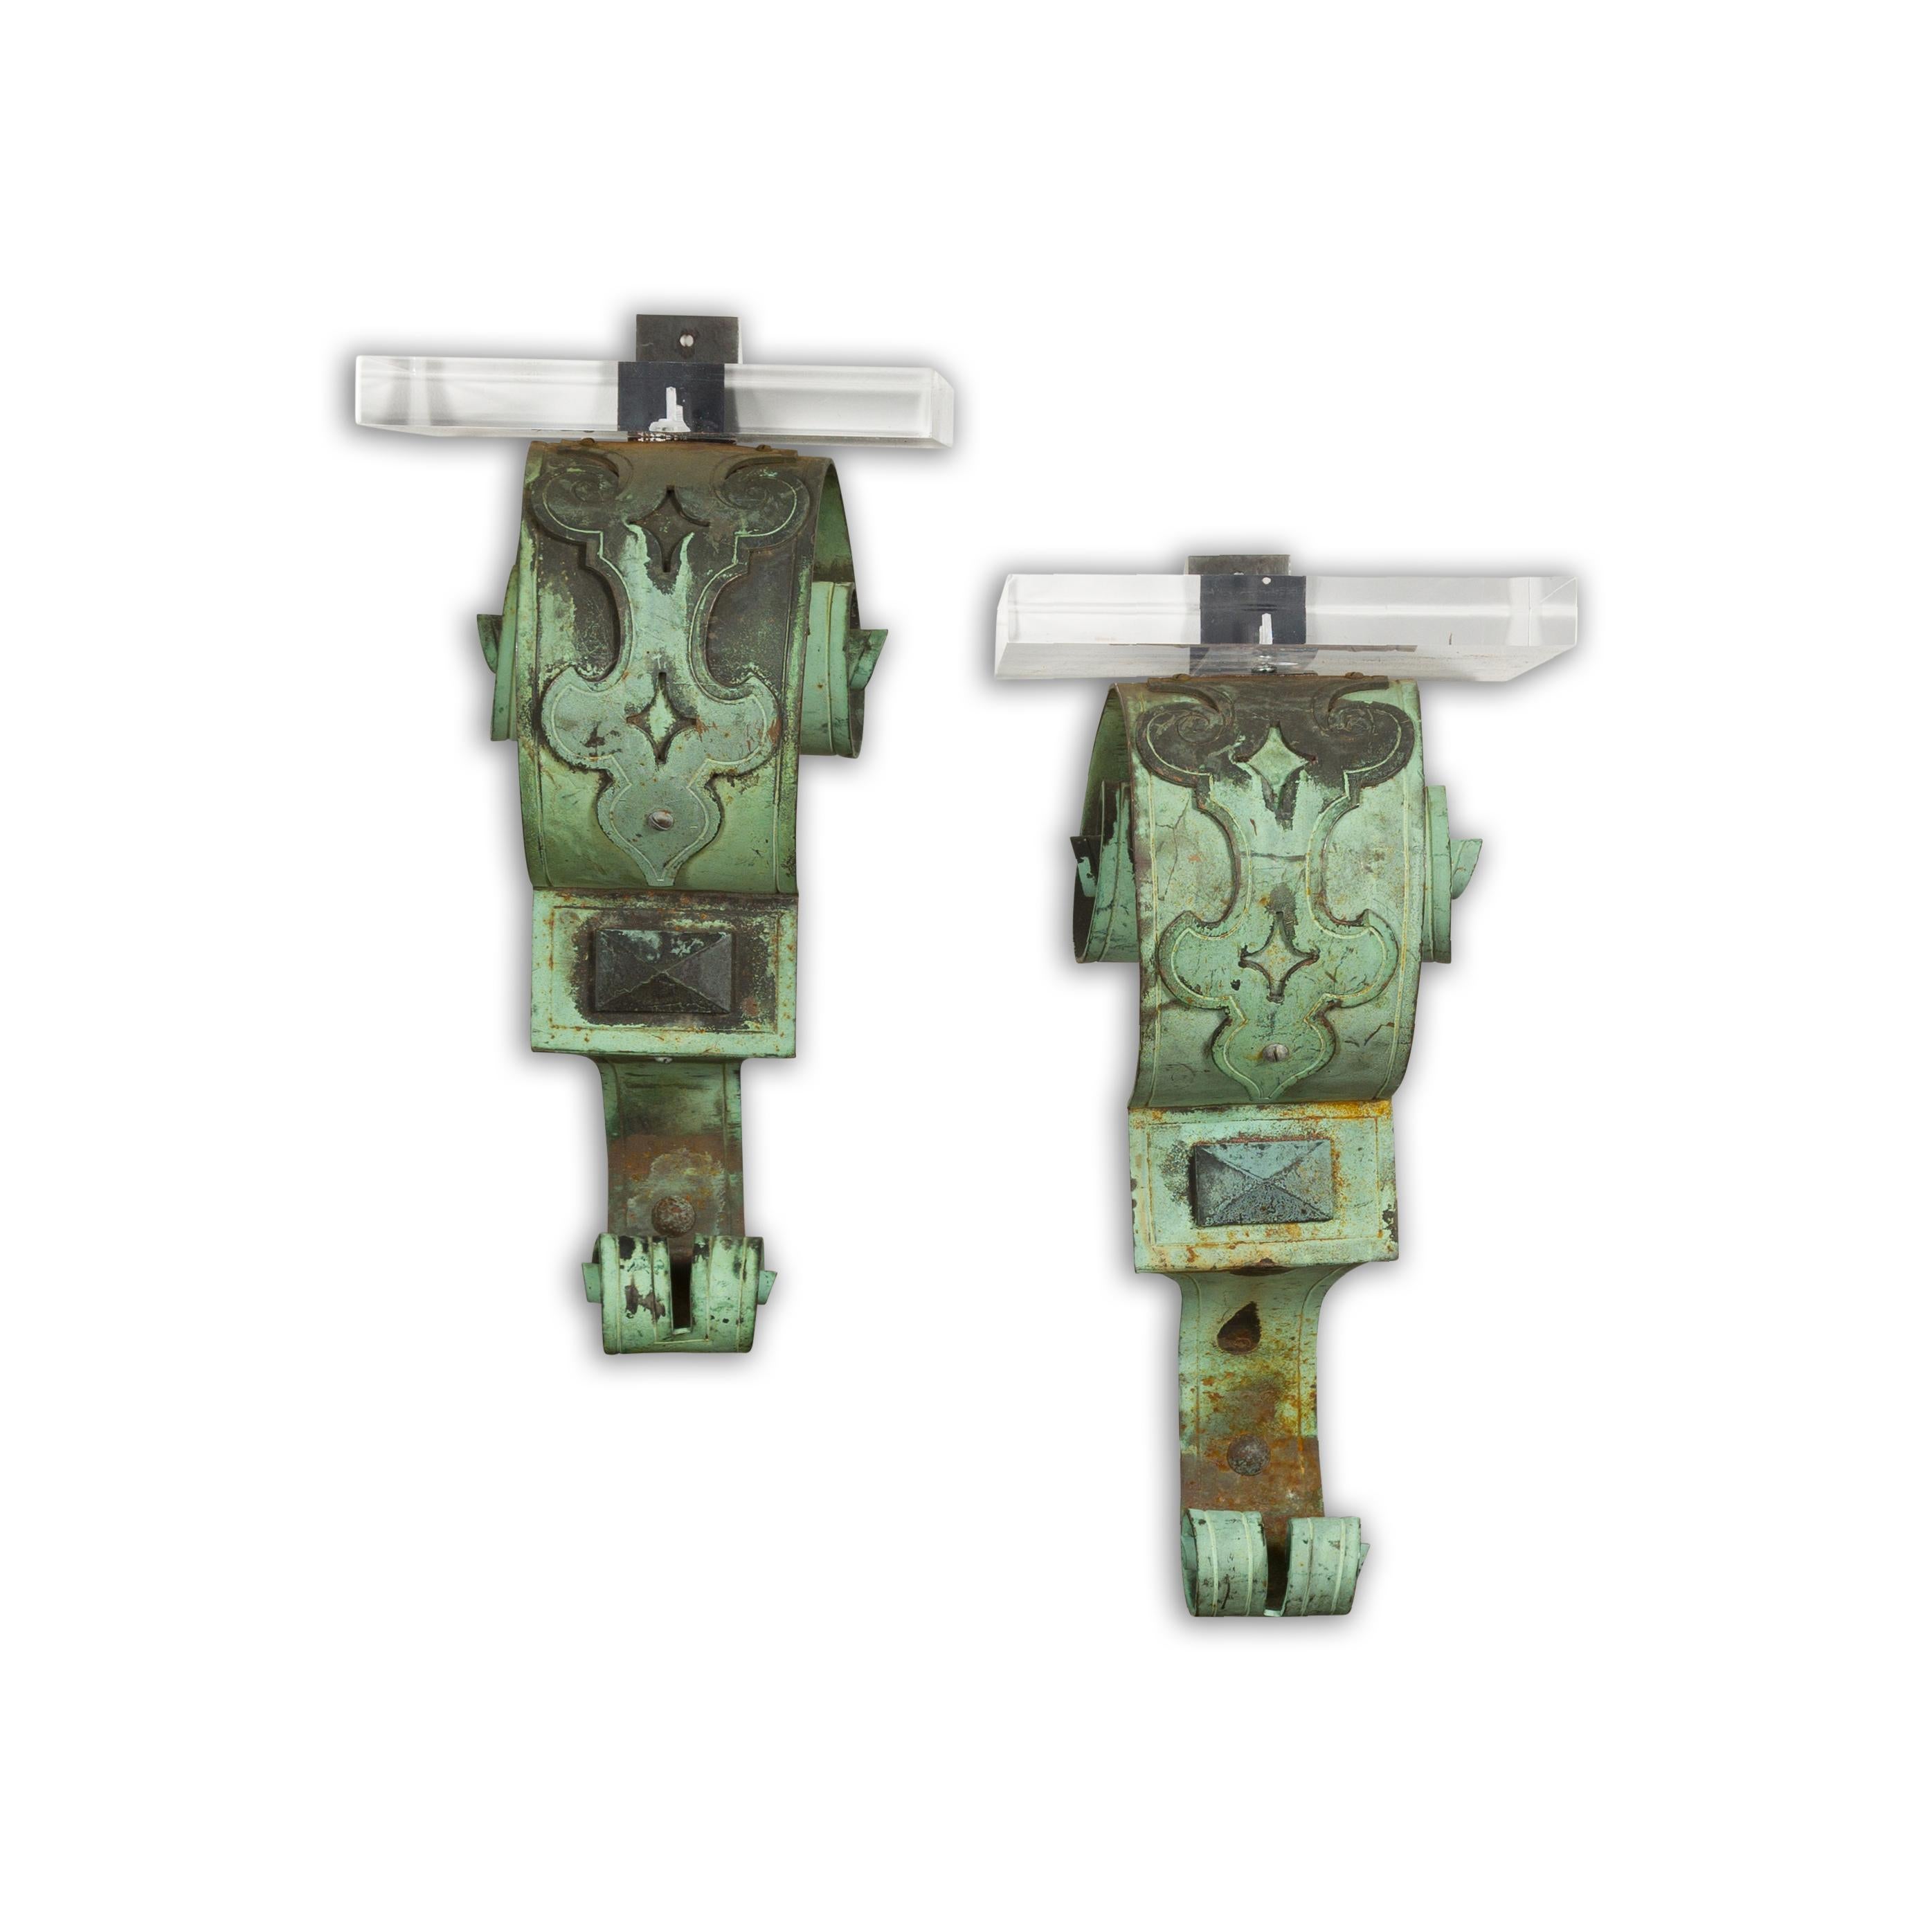 A pair of English bronze wall brackets from the 19th century with lucite tops, scrolling motifs and verdigris patina. Elegantly crafted, this pair of 19th-century English bronze wall brackets exudes a classic charm that transcends time. Adorned with